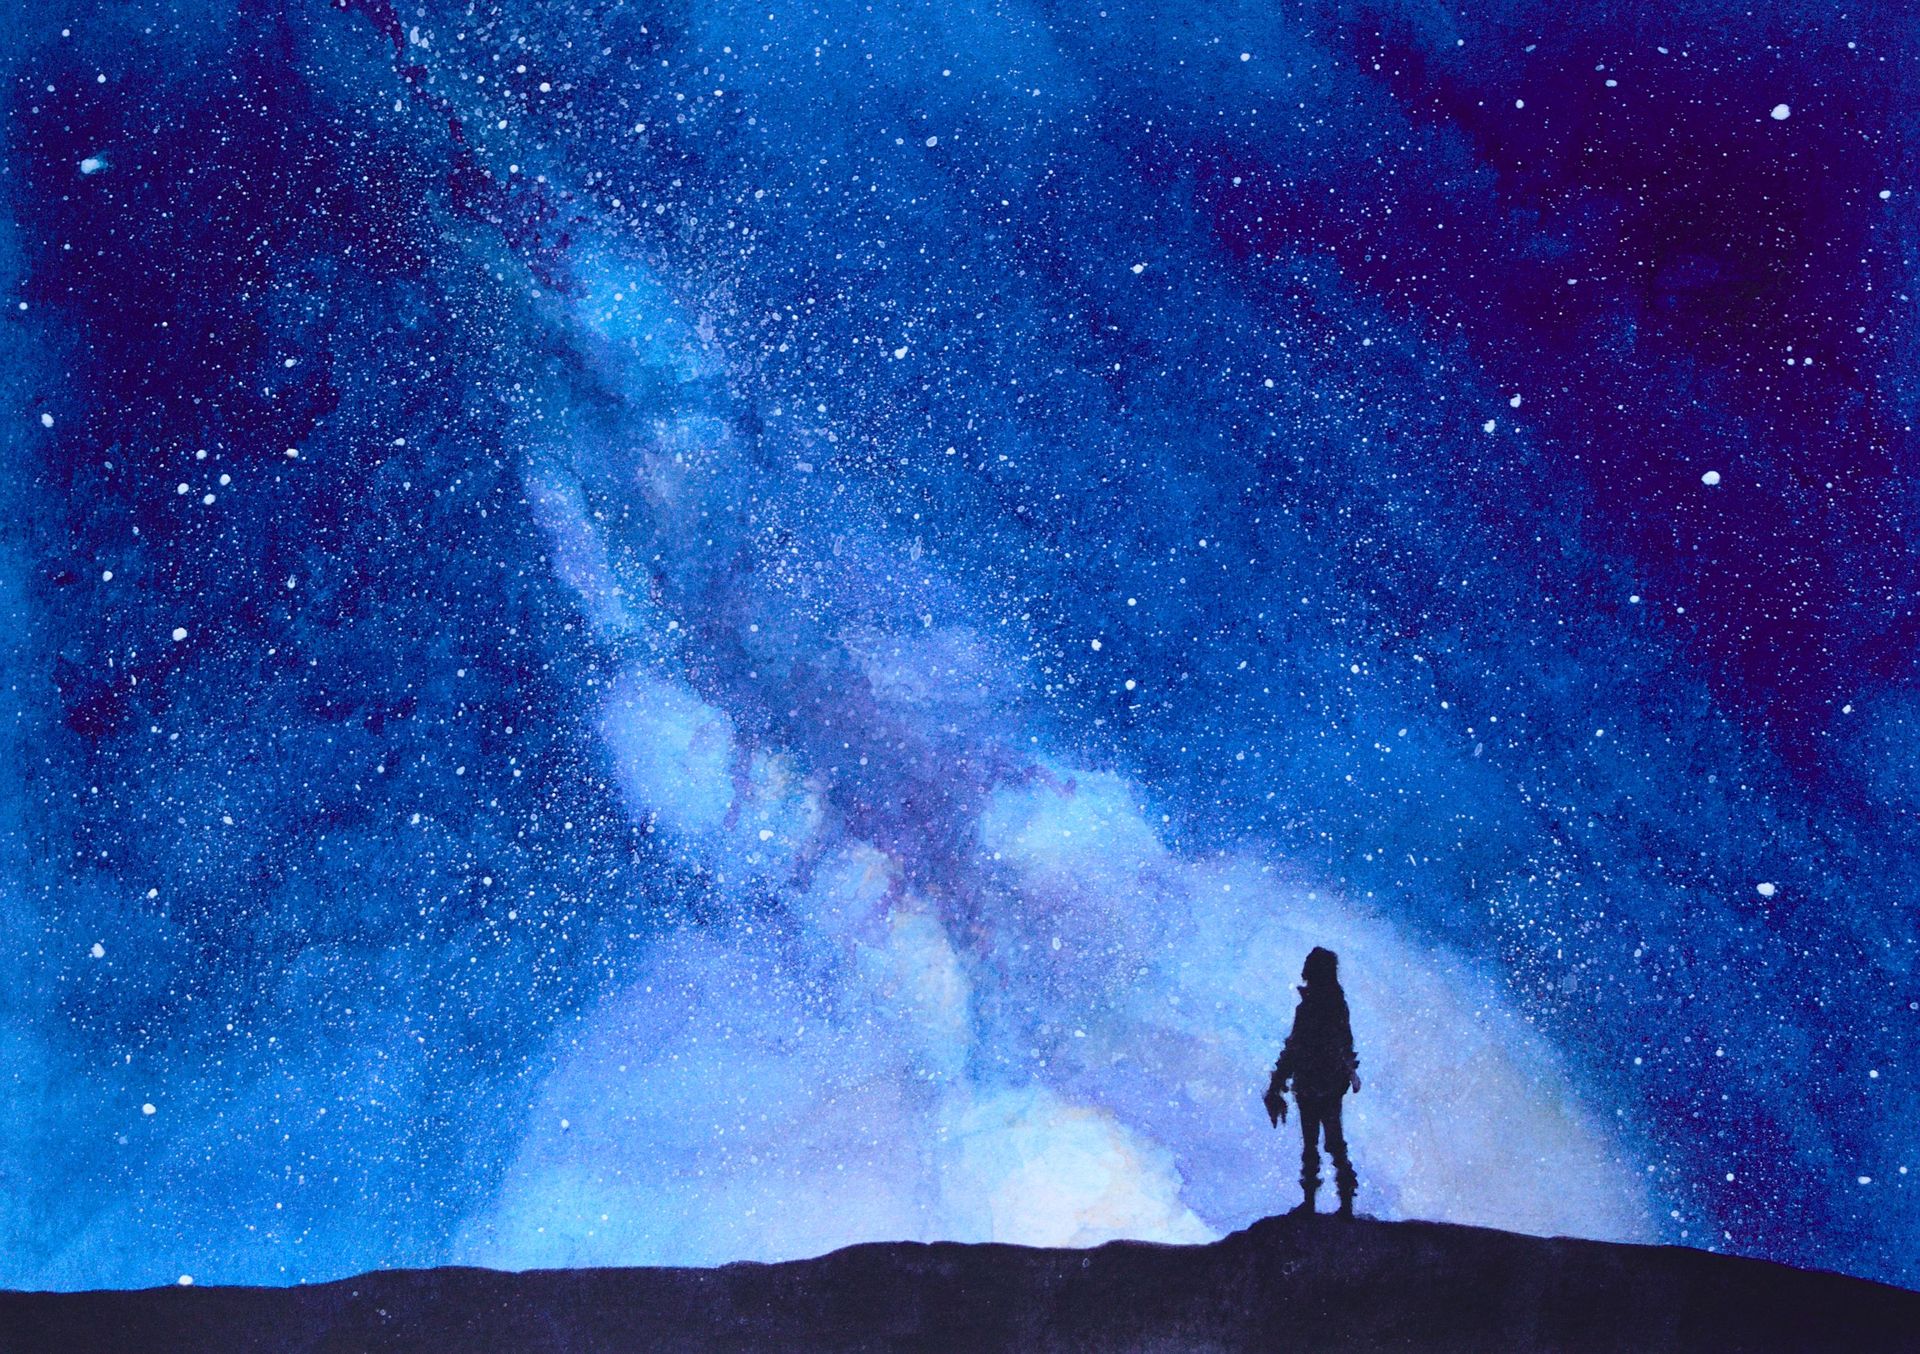 Watercolor painting of a night sky with Milky Way. In the bottom right, there is a small black silhouette of a woman, looking up.